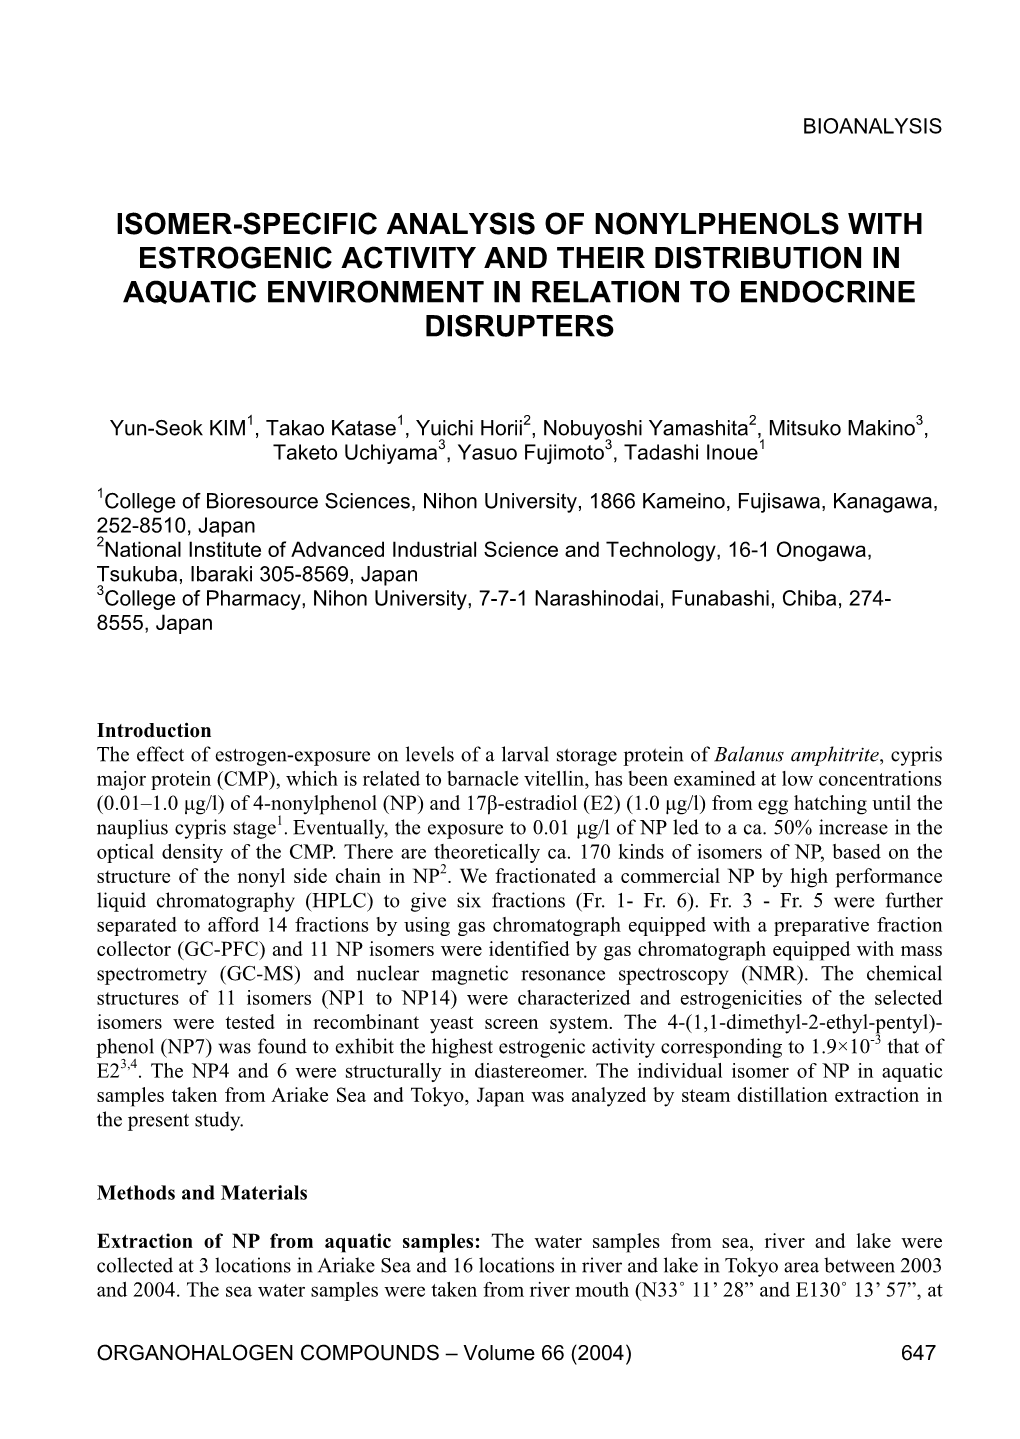 Isomer-Specific Analysis of Nonylphenols with Estrogenic Activity and Their Distribution in Aquatic Environment in Relation to Endocrine Disrupters